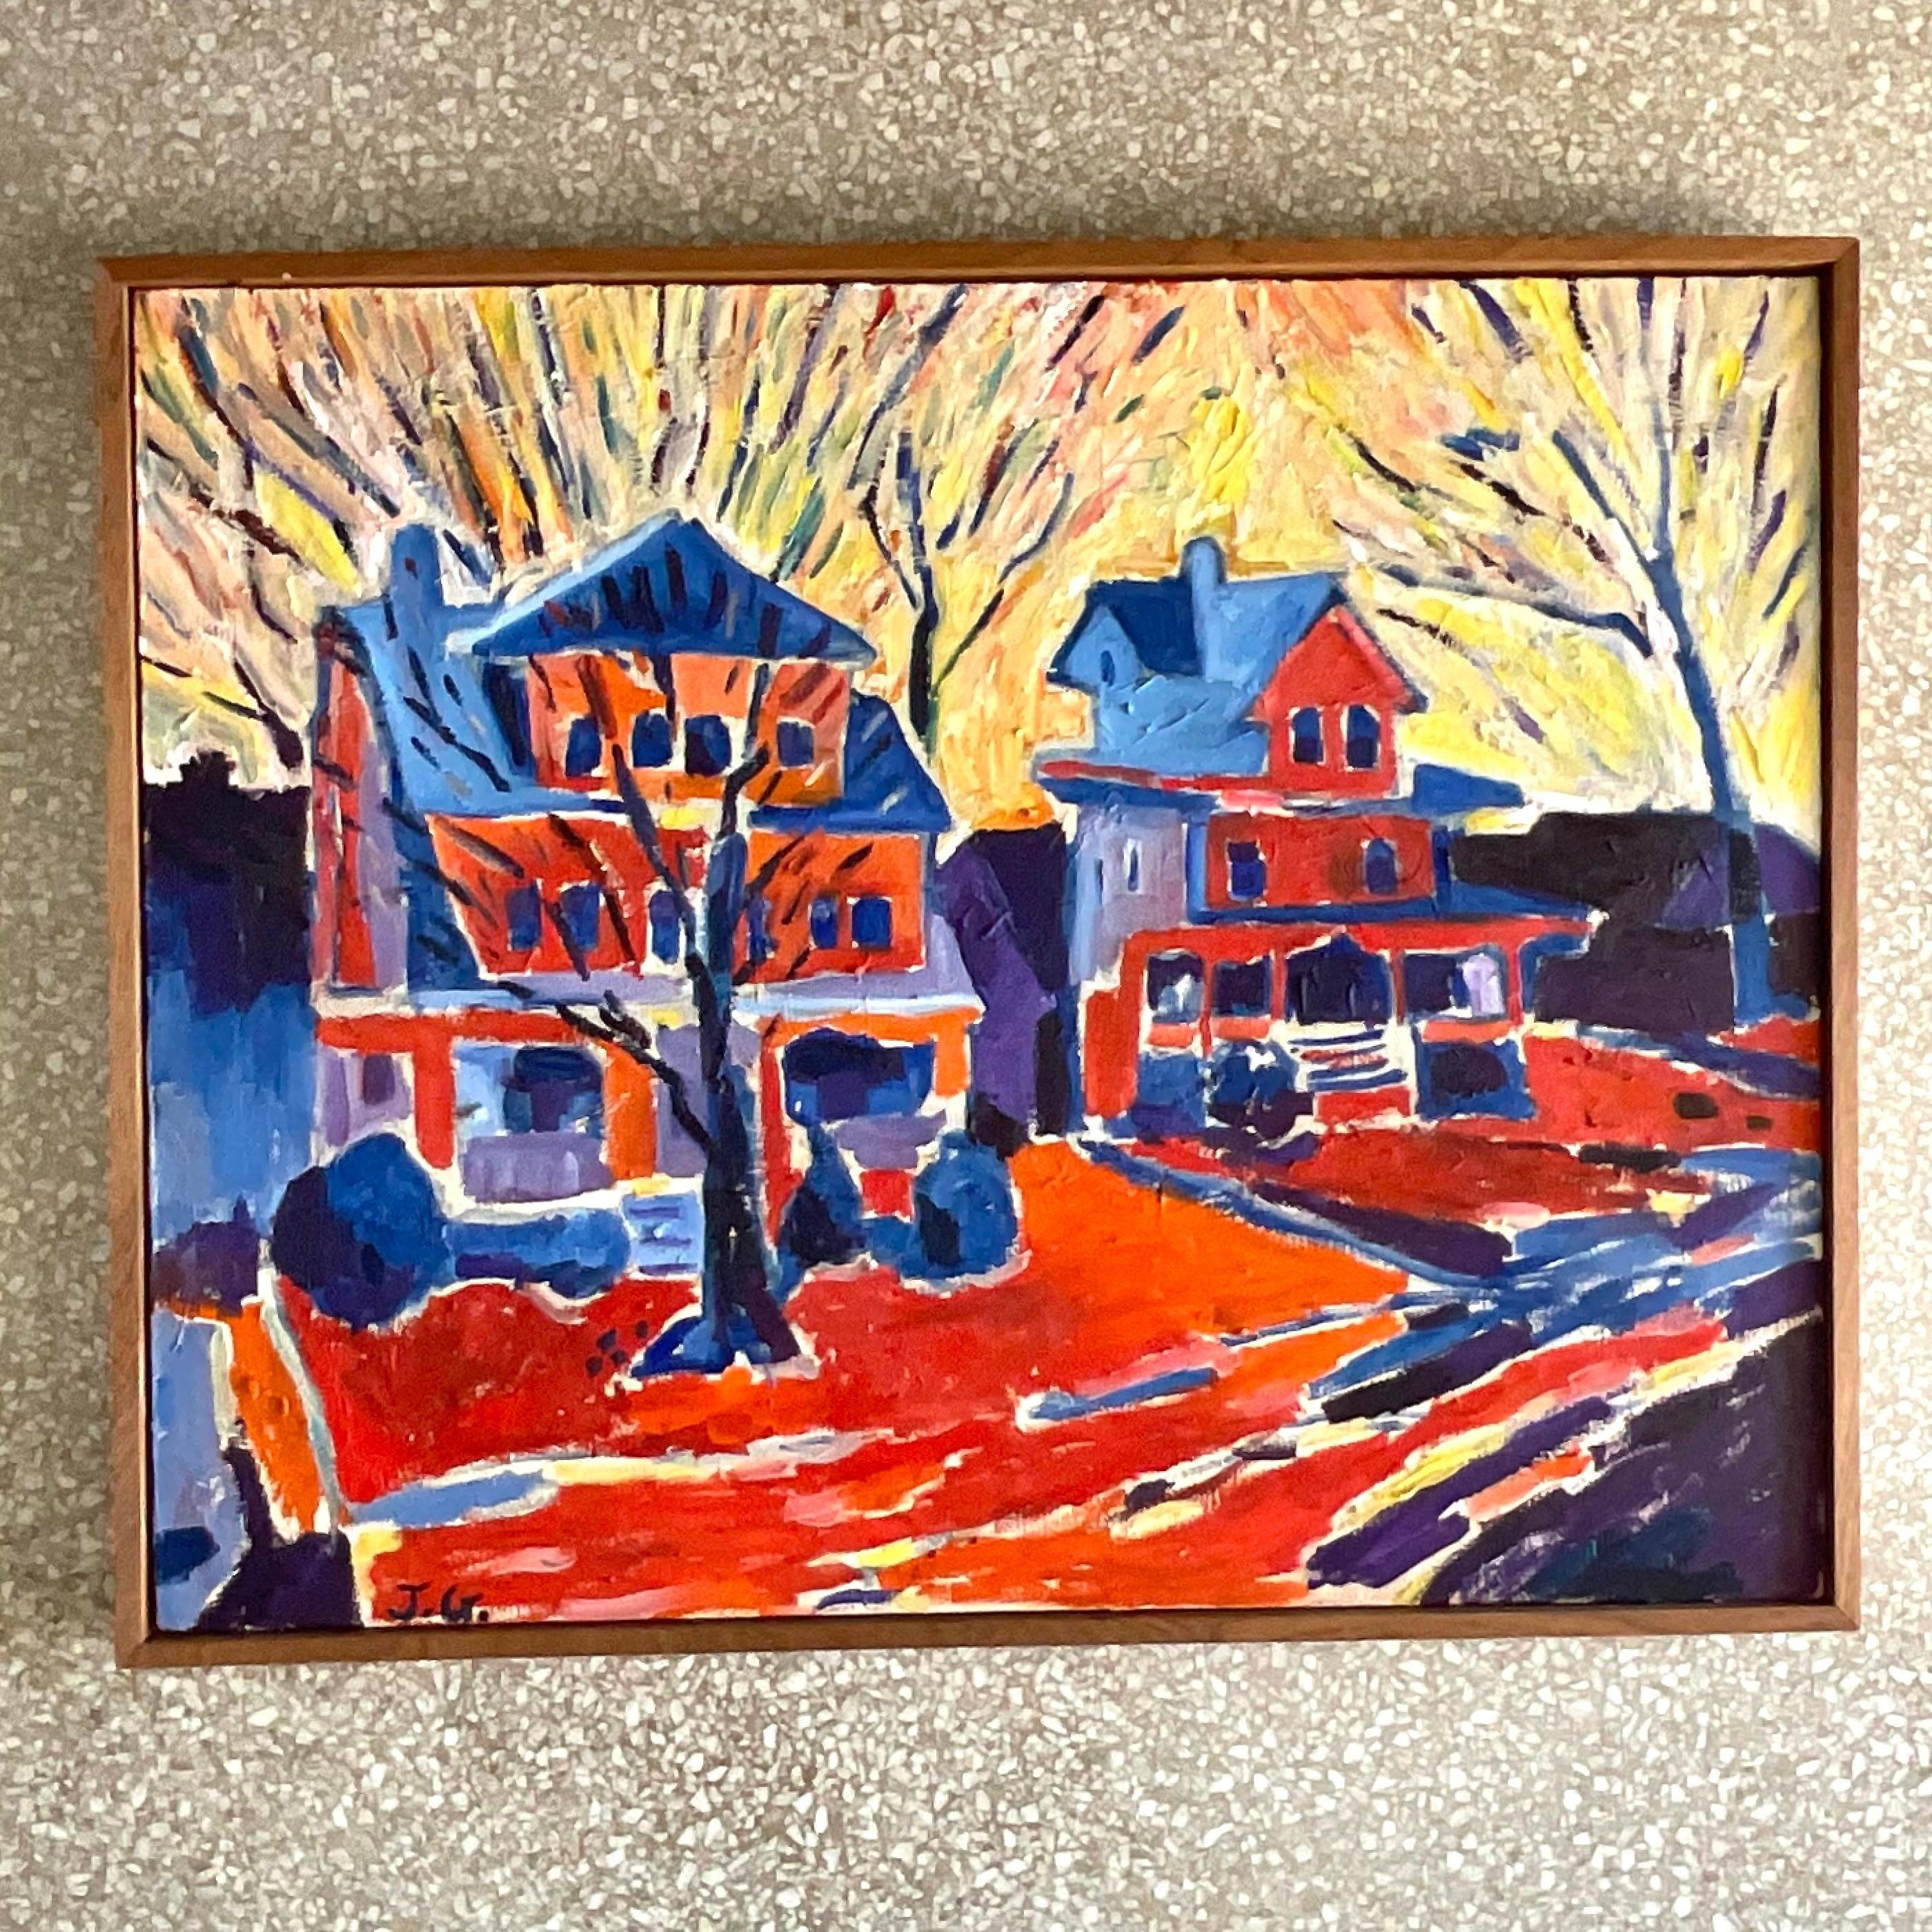 Vintage Boho Signed Original Abstract Expressionist Oil Painting on Canvas In Good Condition For Sale In west palm beach, FL